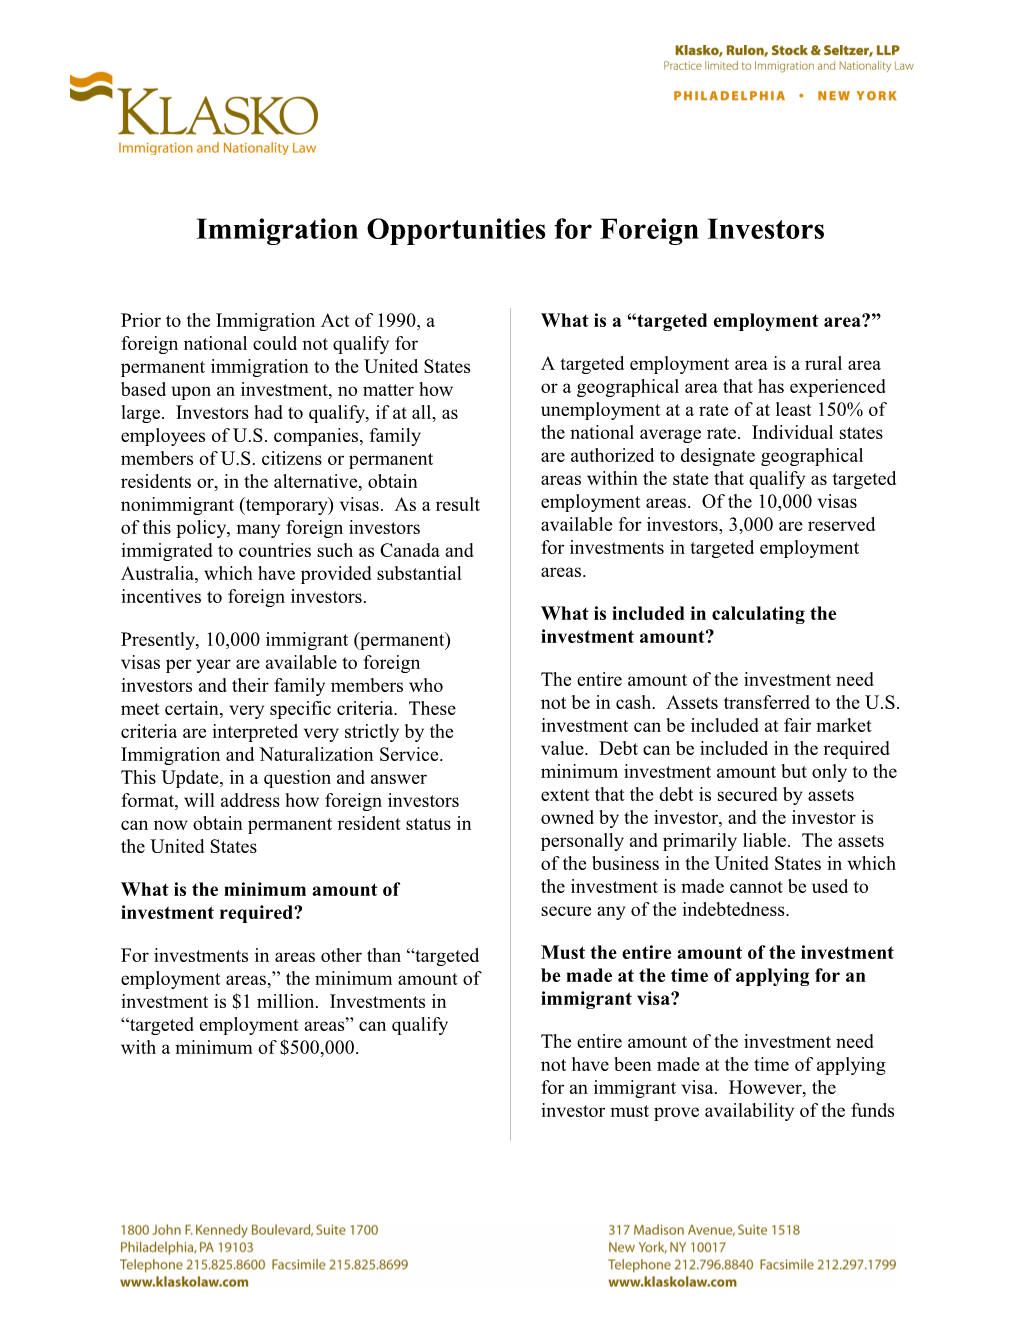 Update- Immigration Opportunities for Foreign Investors (00000216;1)